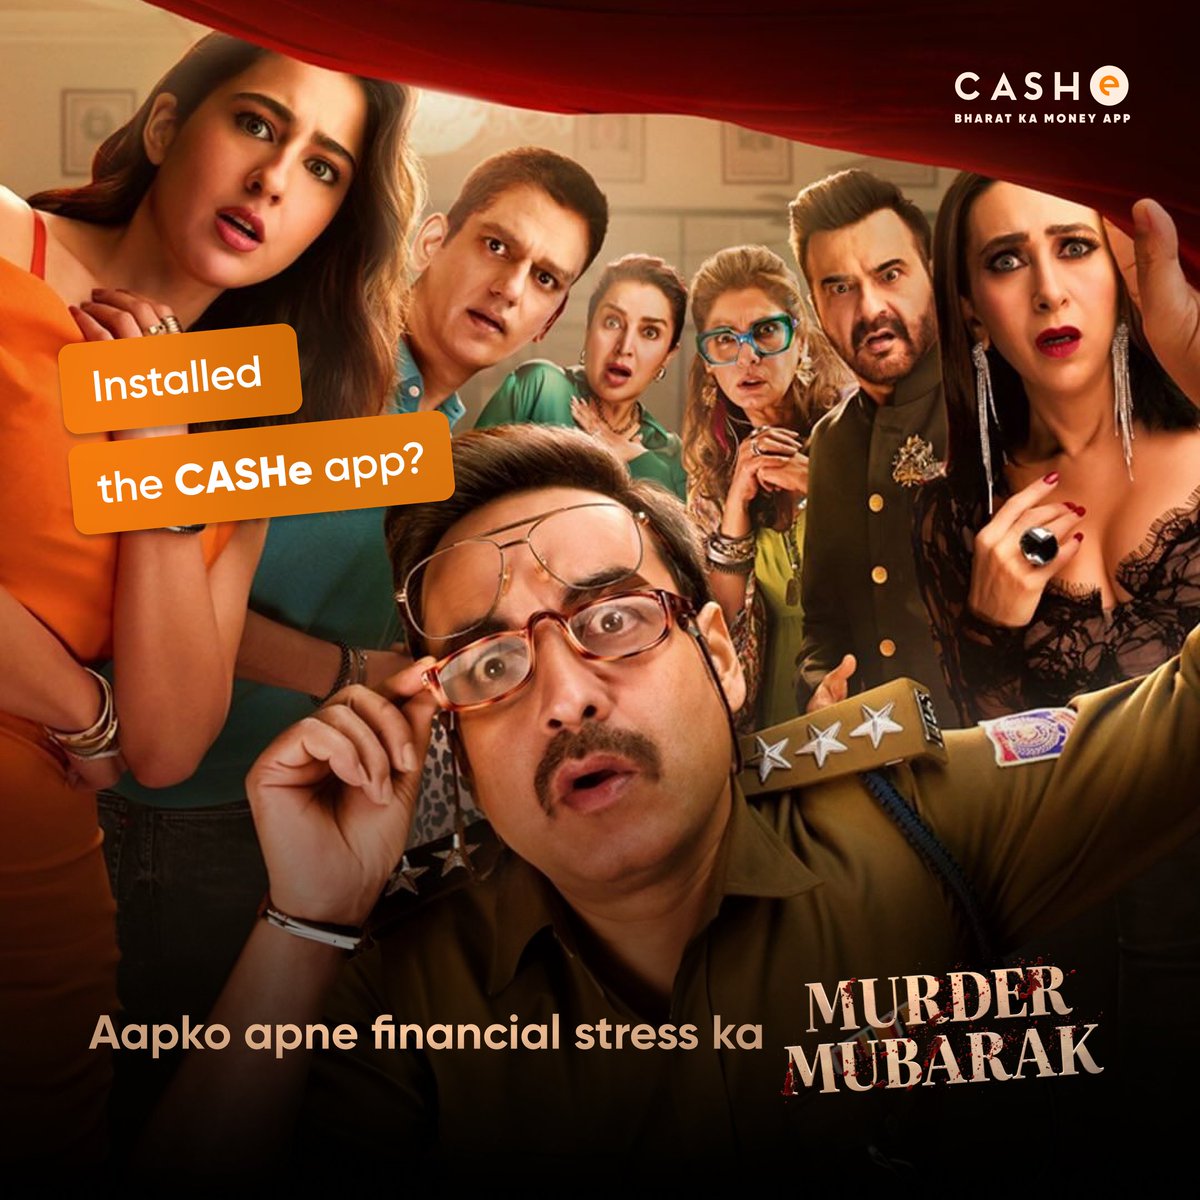 You don't want to get caught as the murderer (of your bank balance)! 😵‍💫 Prevent this, install the CASHe app now and don't let your bank balance die out. #CASHe #InvestAndBorrow #BharatKaMoneyApp #MurderMubarak